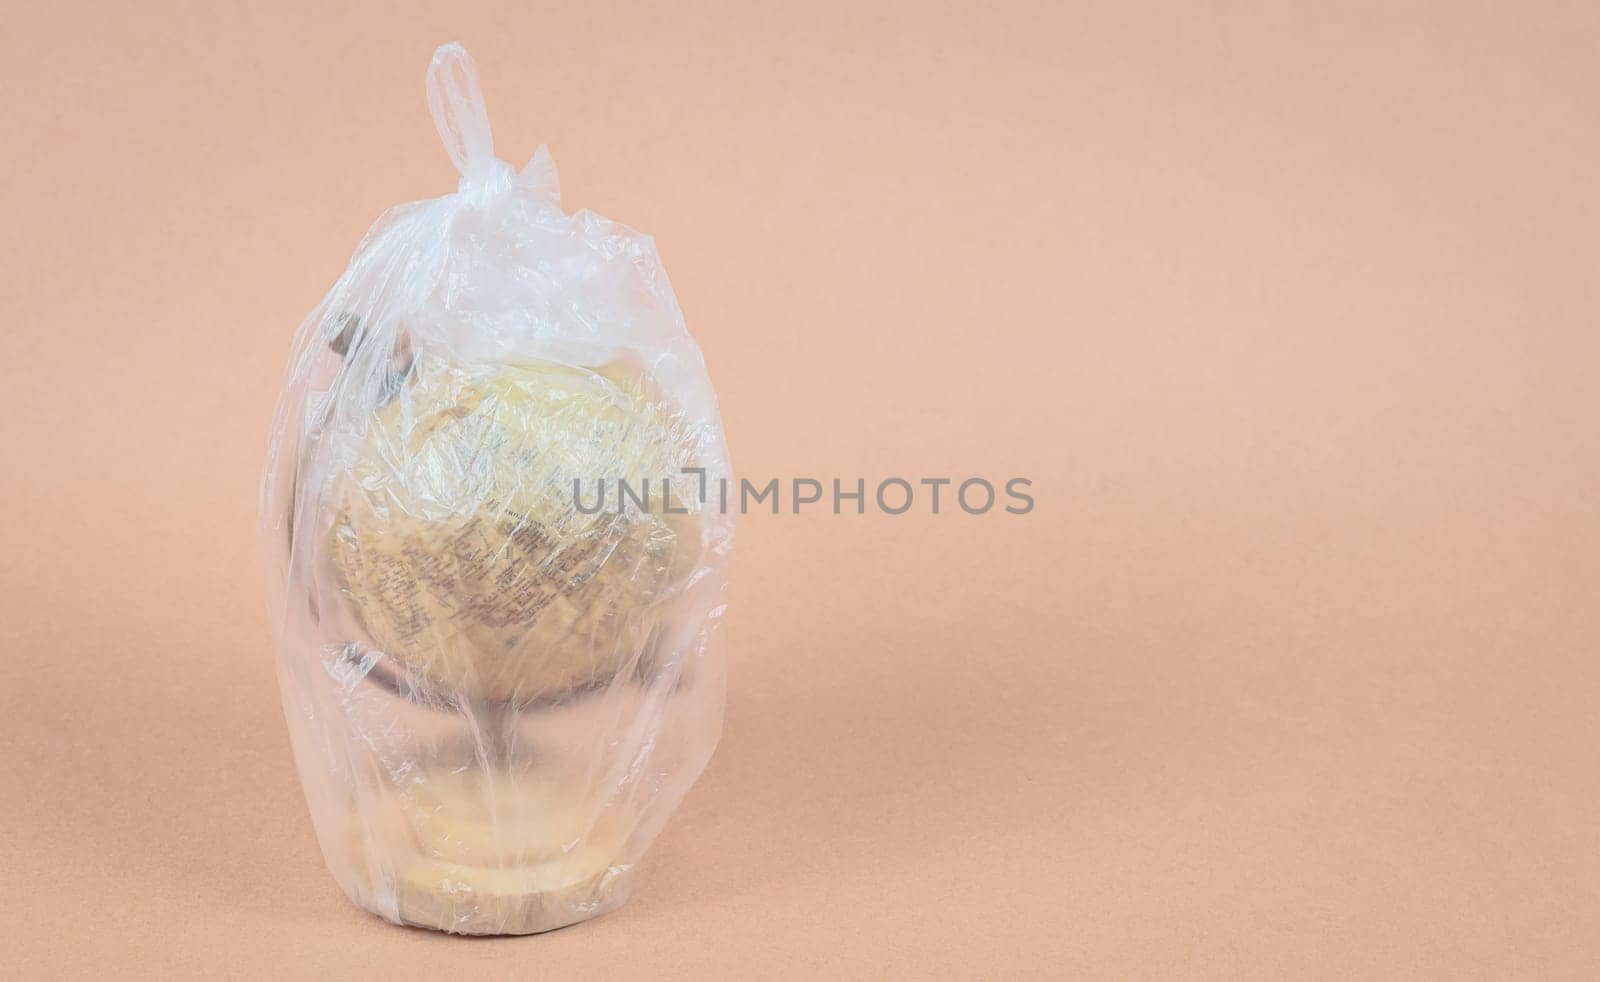 One planet earth globe inside a plastic bag stands on the left on a beige background with copy space on the right, side view close-up.